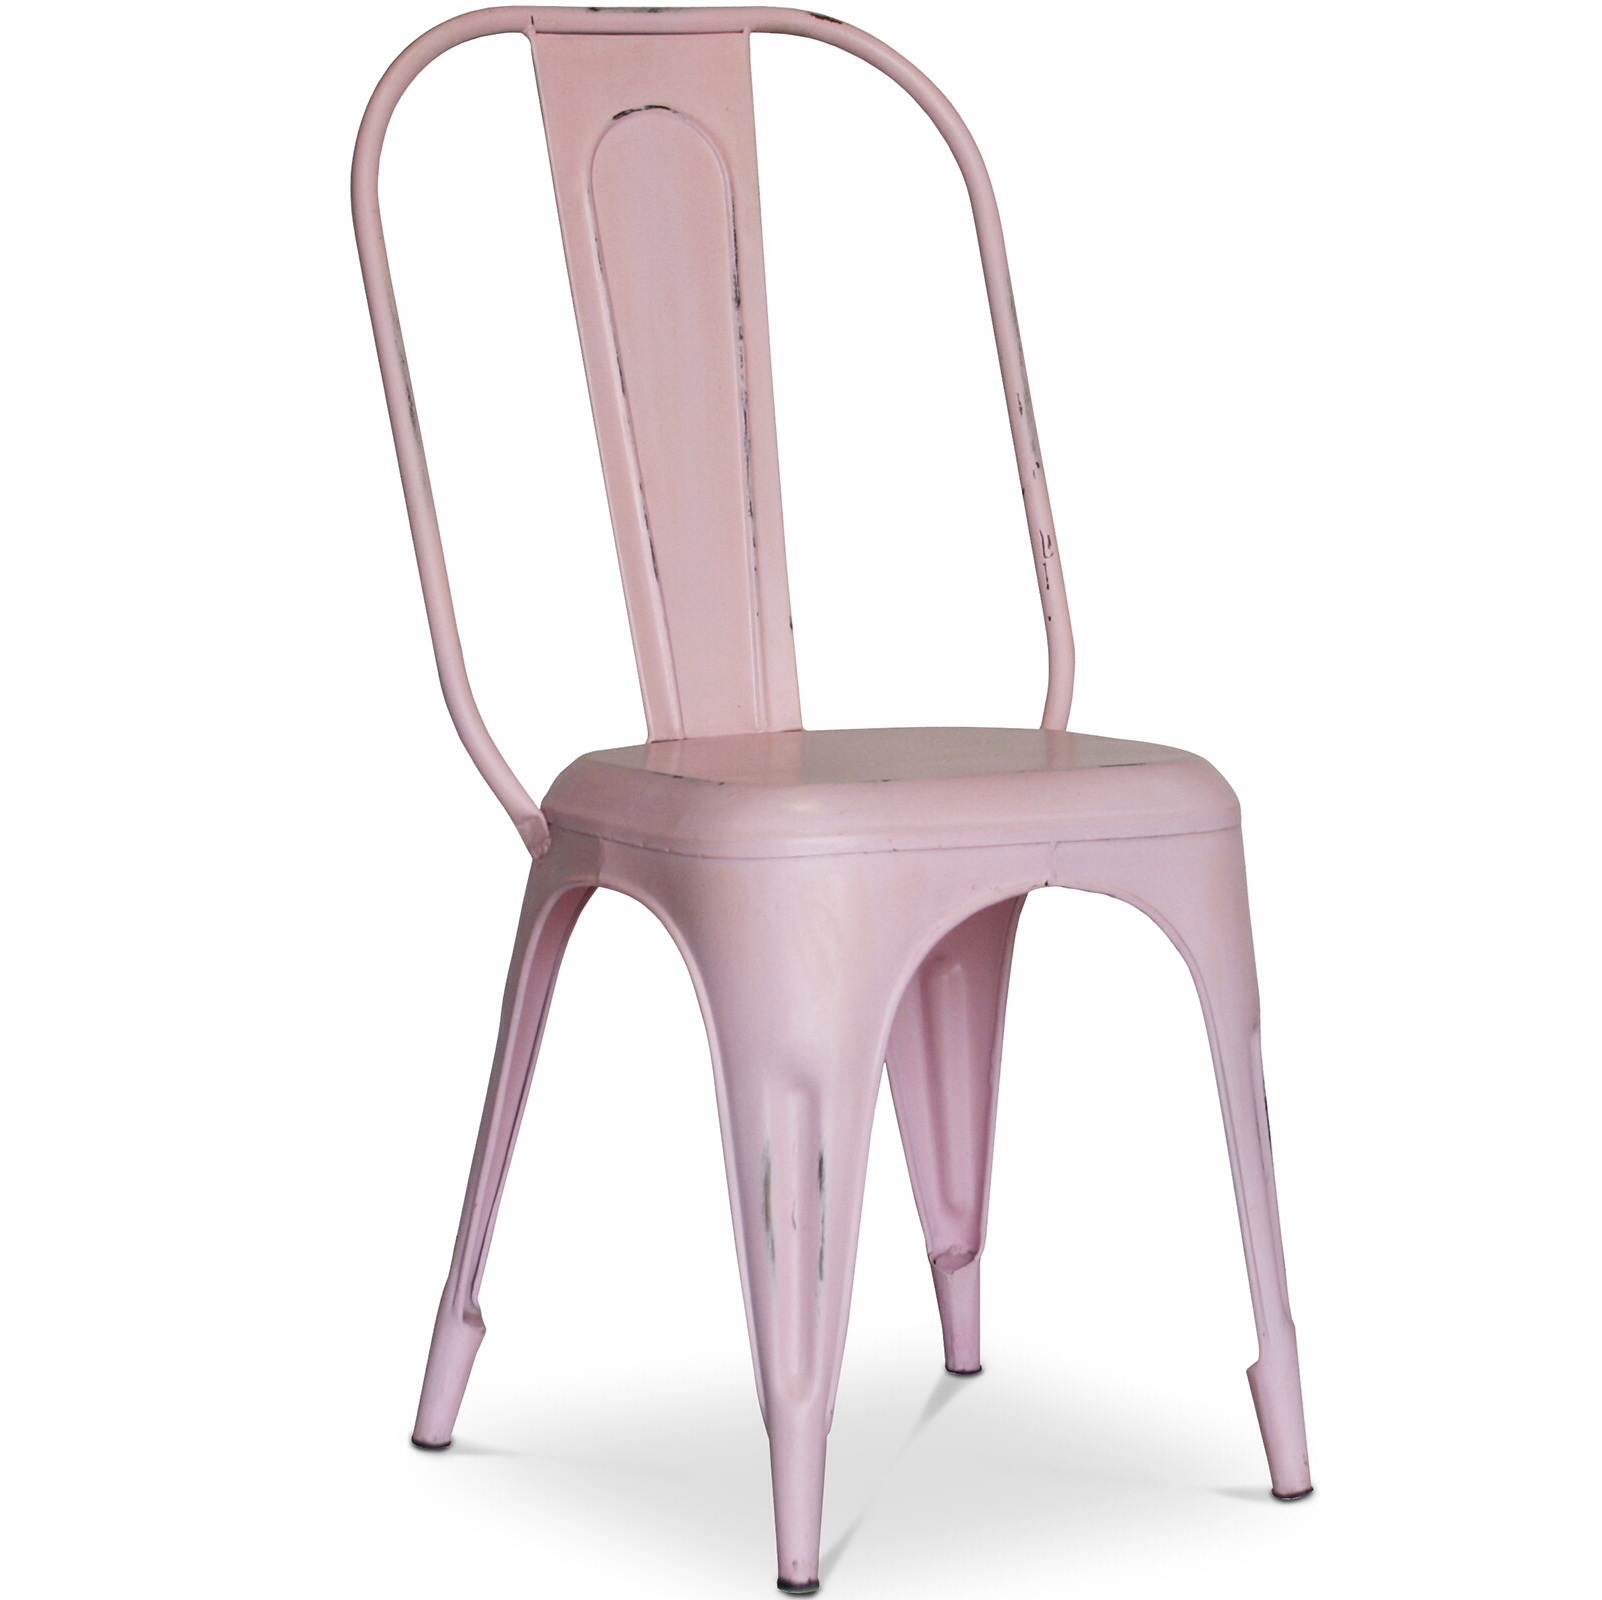 Bistro Retro Chair 450 mm high weathered Pink